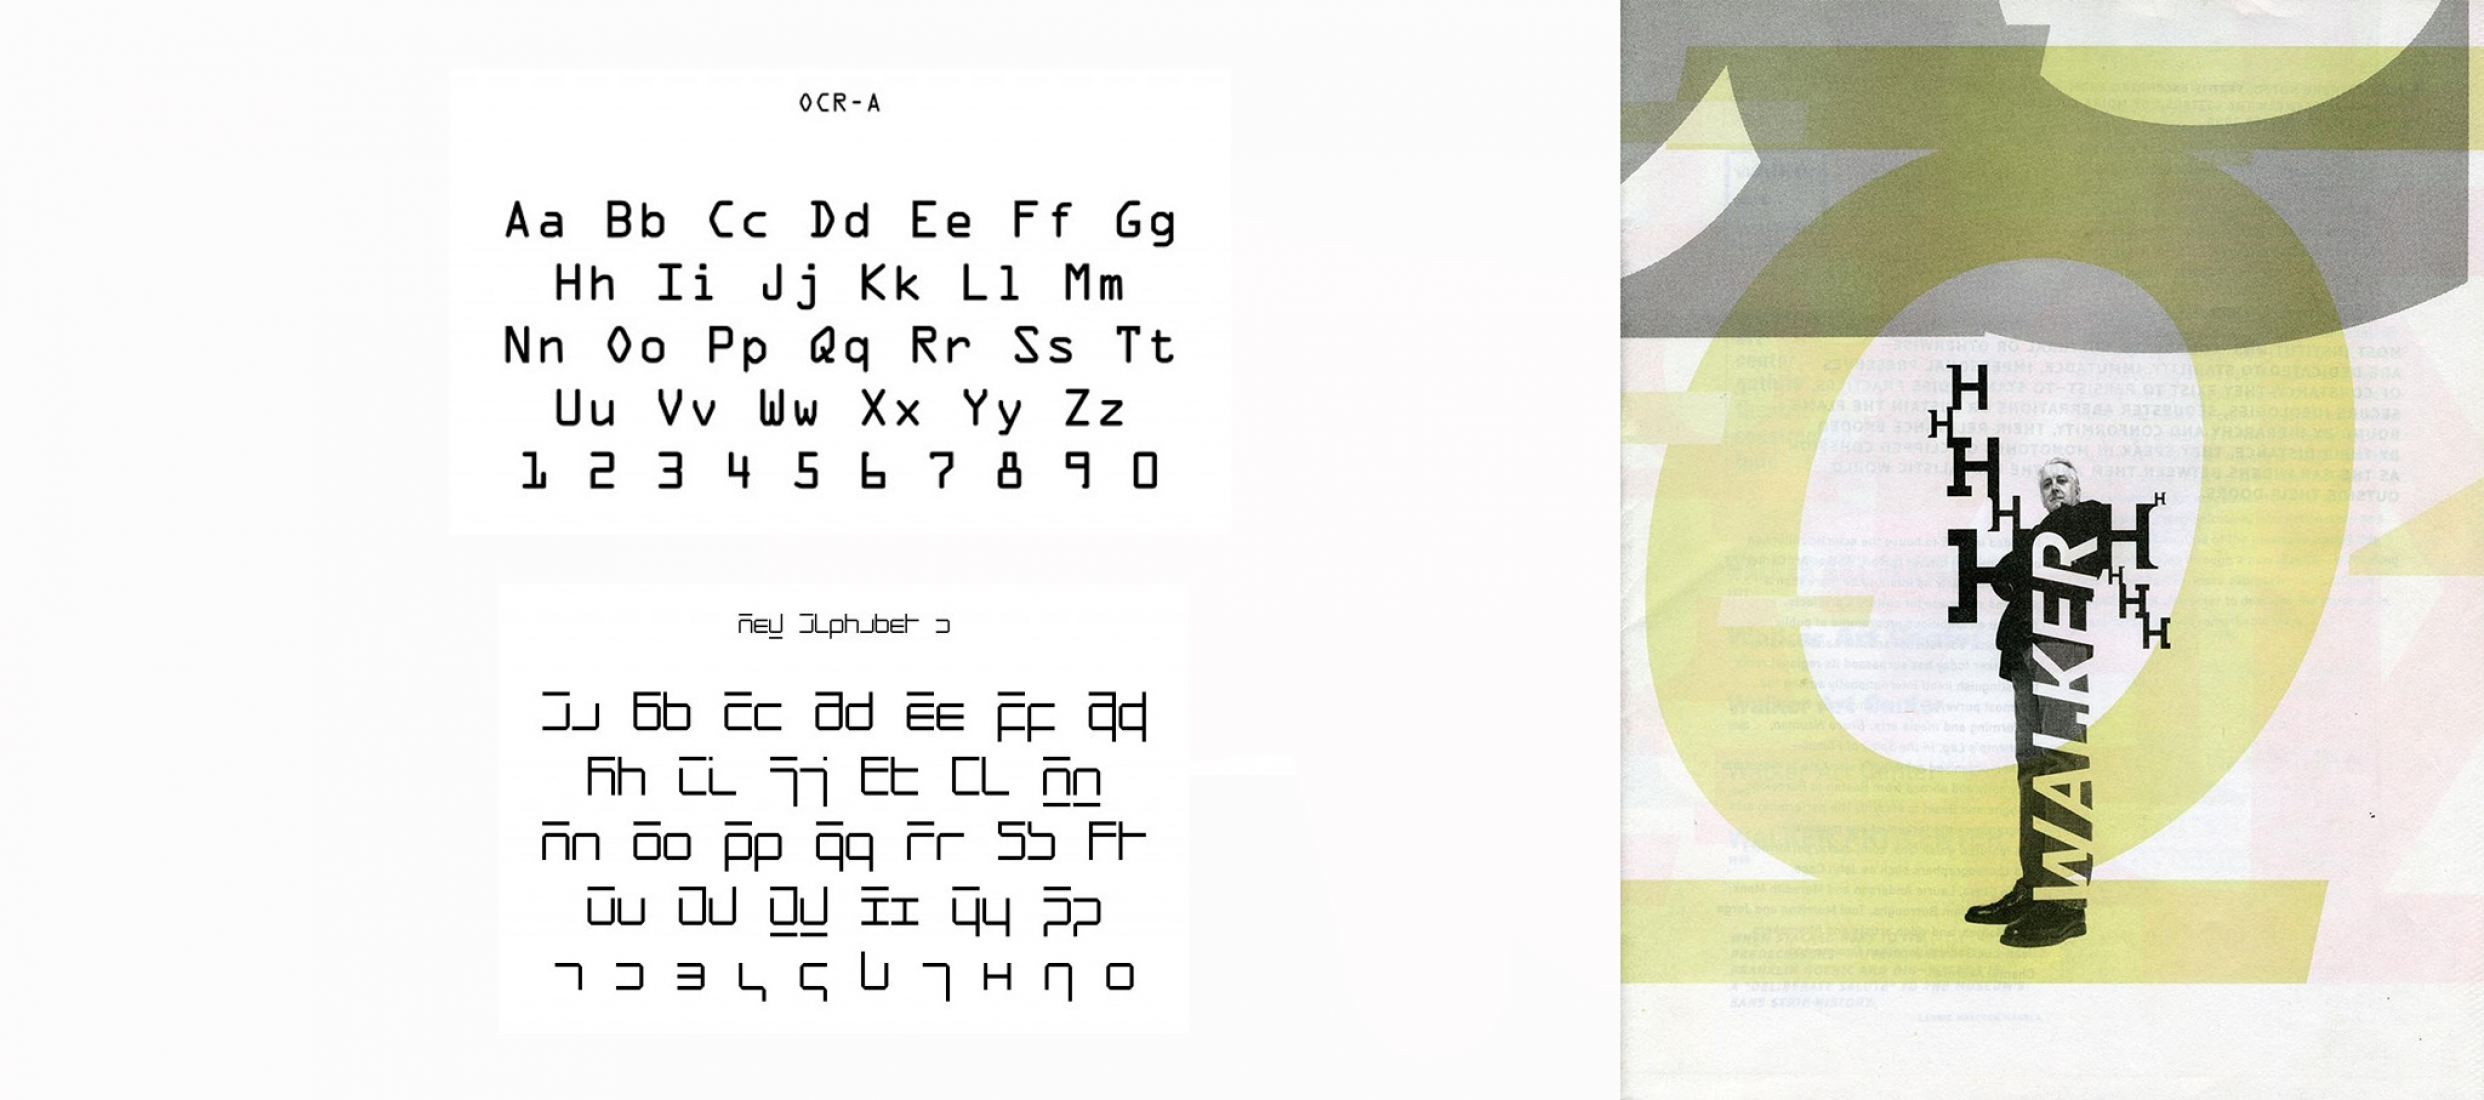 MoMA has acquired 23 digital fonts